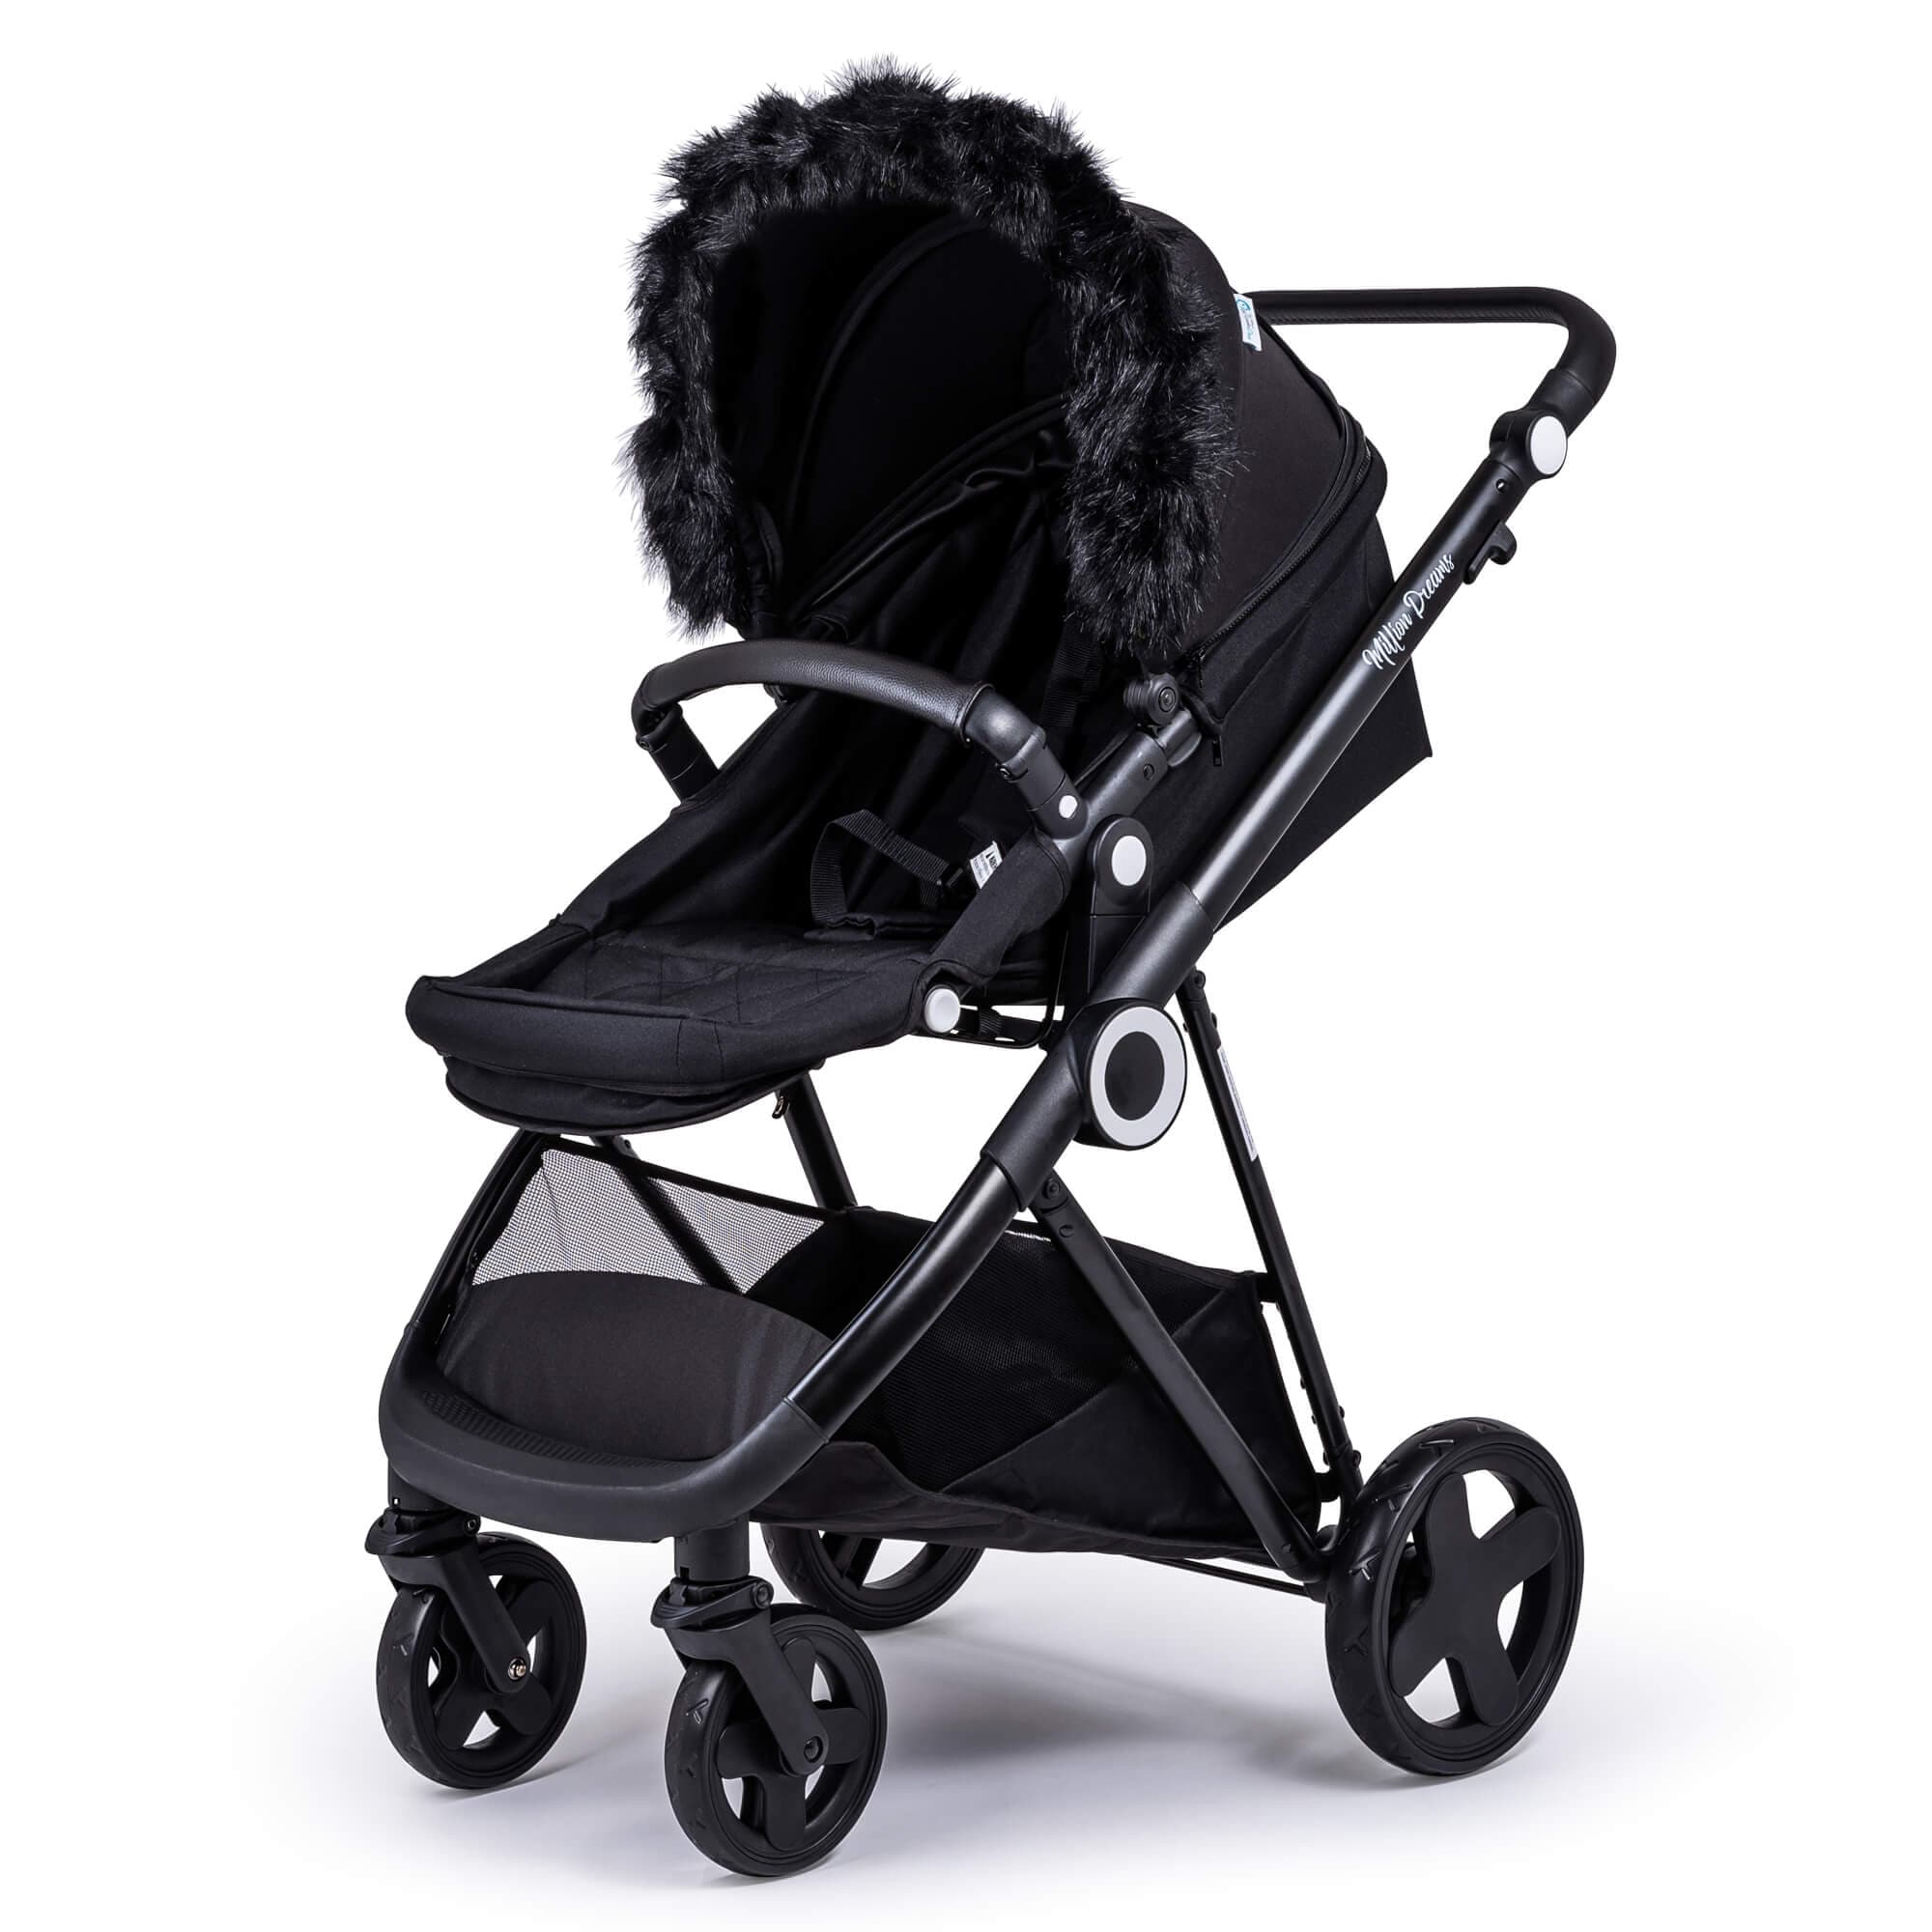 Pram Fur Hood Trim Attachment for Pushchair Compatible with Formula - For Your Little One